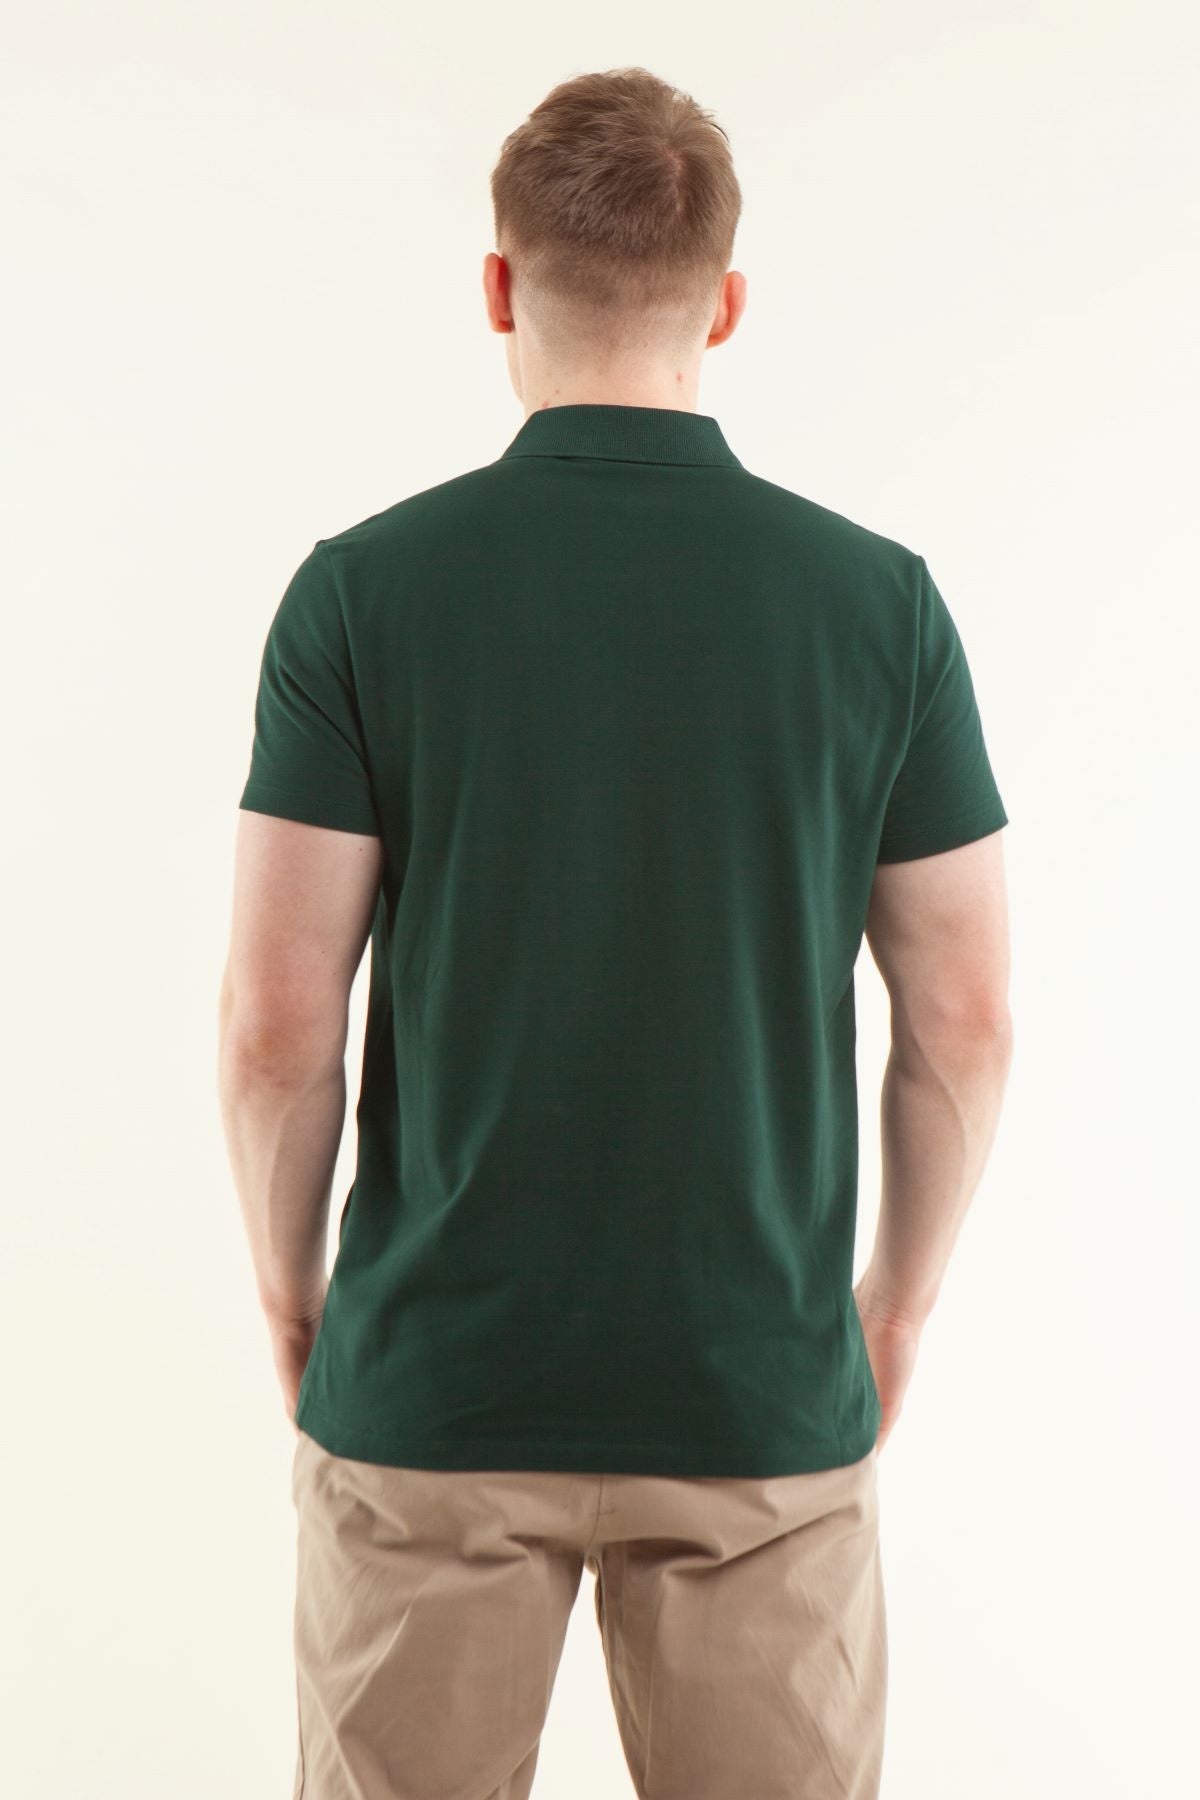 The Lightweight Polo - Multipack of 2